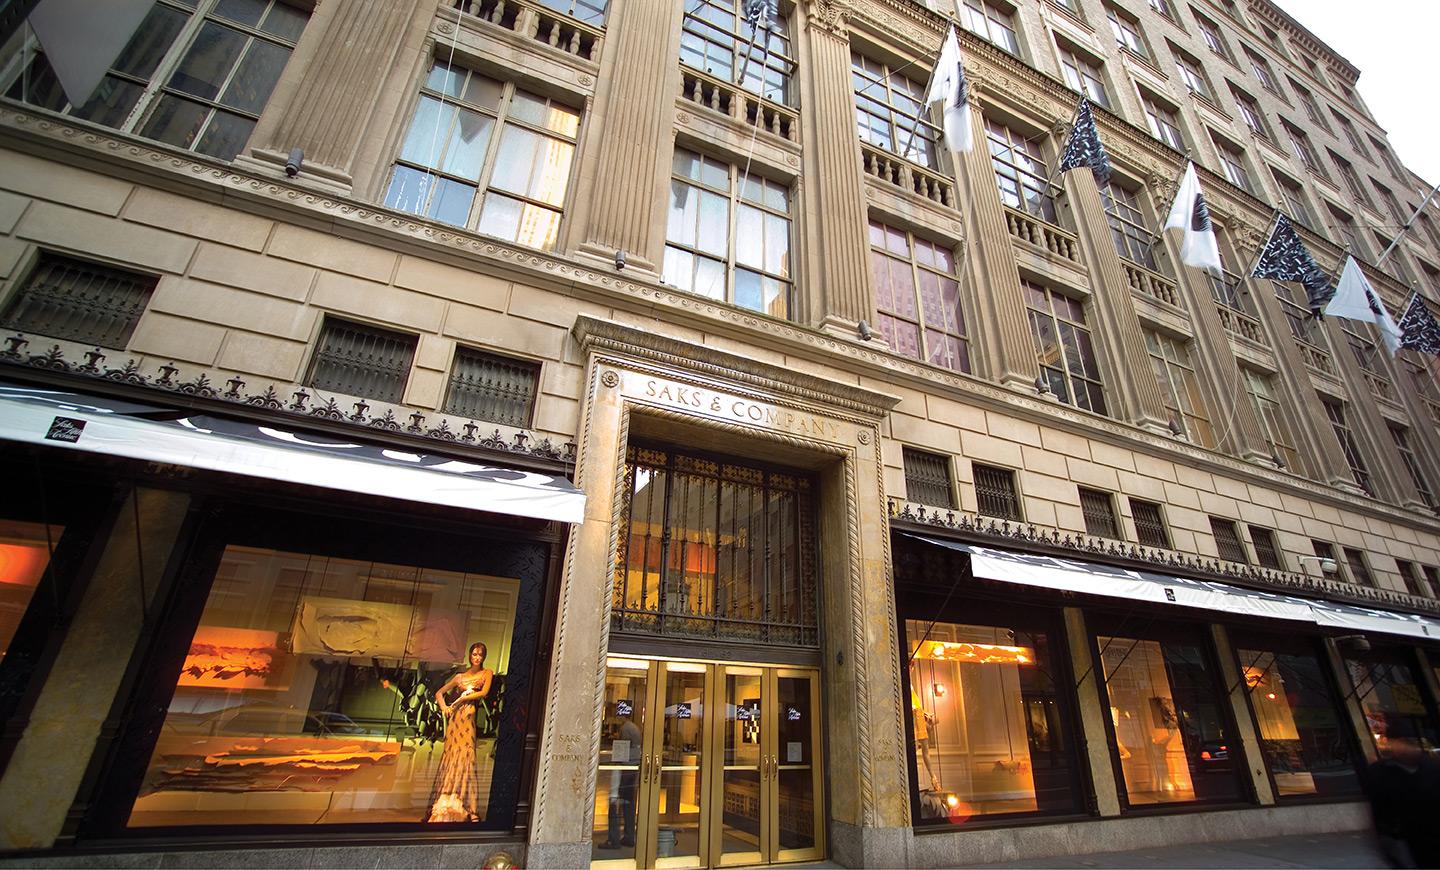 Saks fifth avenue partners with Disney for animated window displays - Luxur...